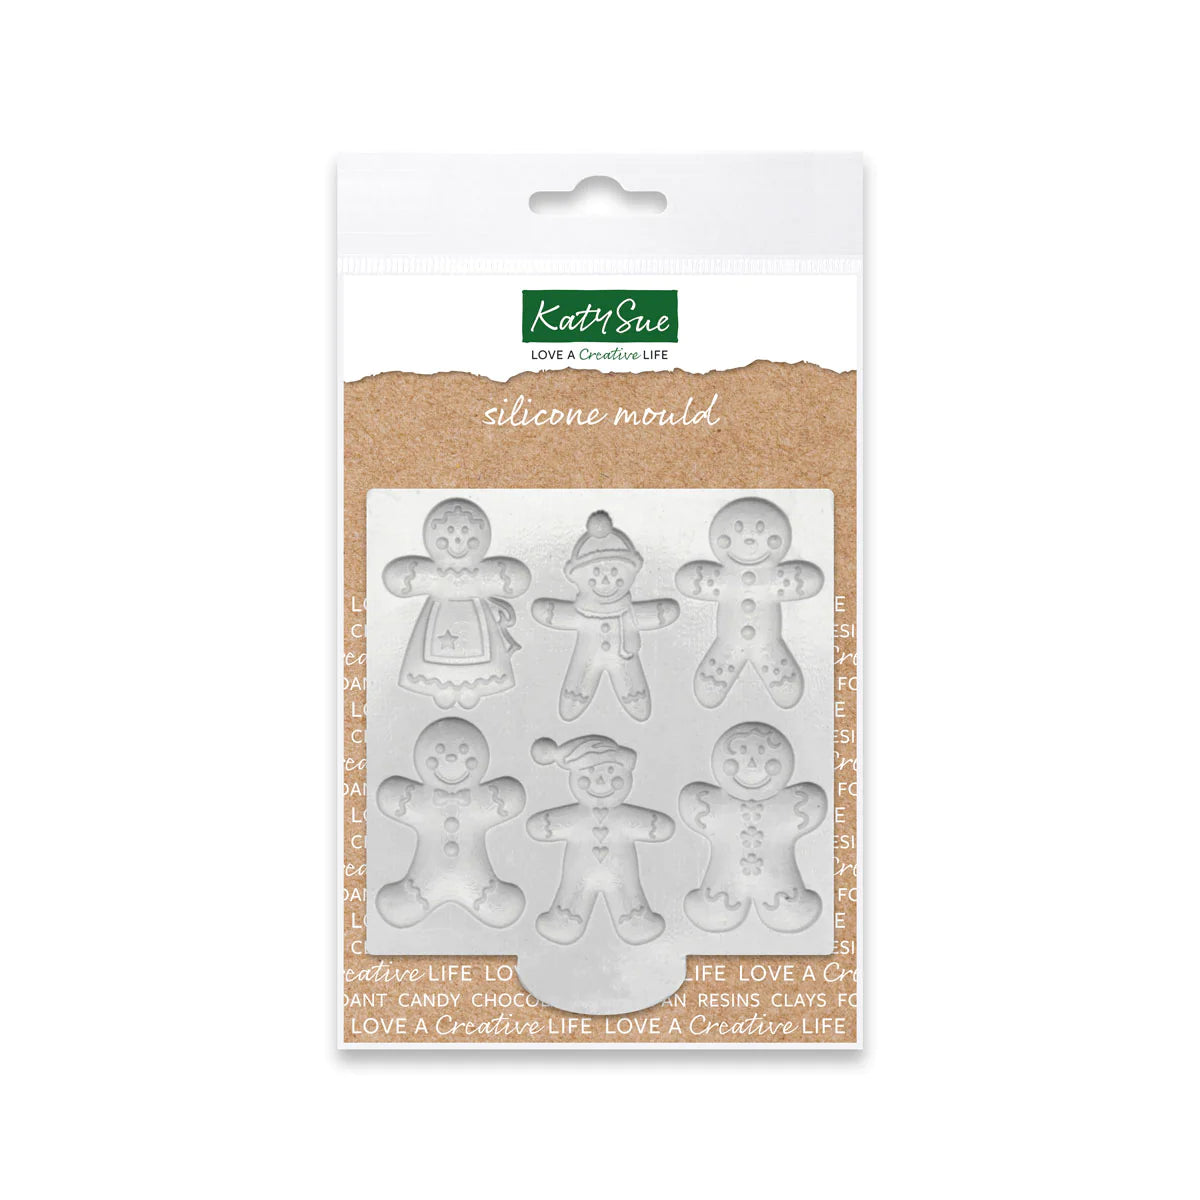 Katy Sue Gingerbread People Silicone Mould